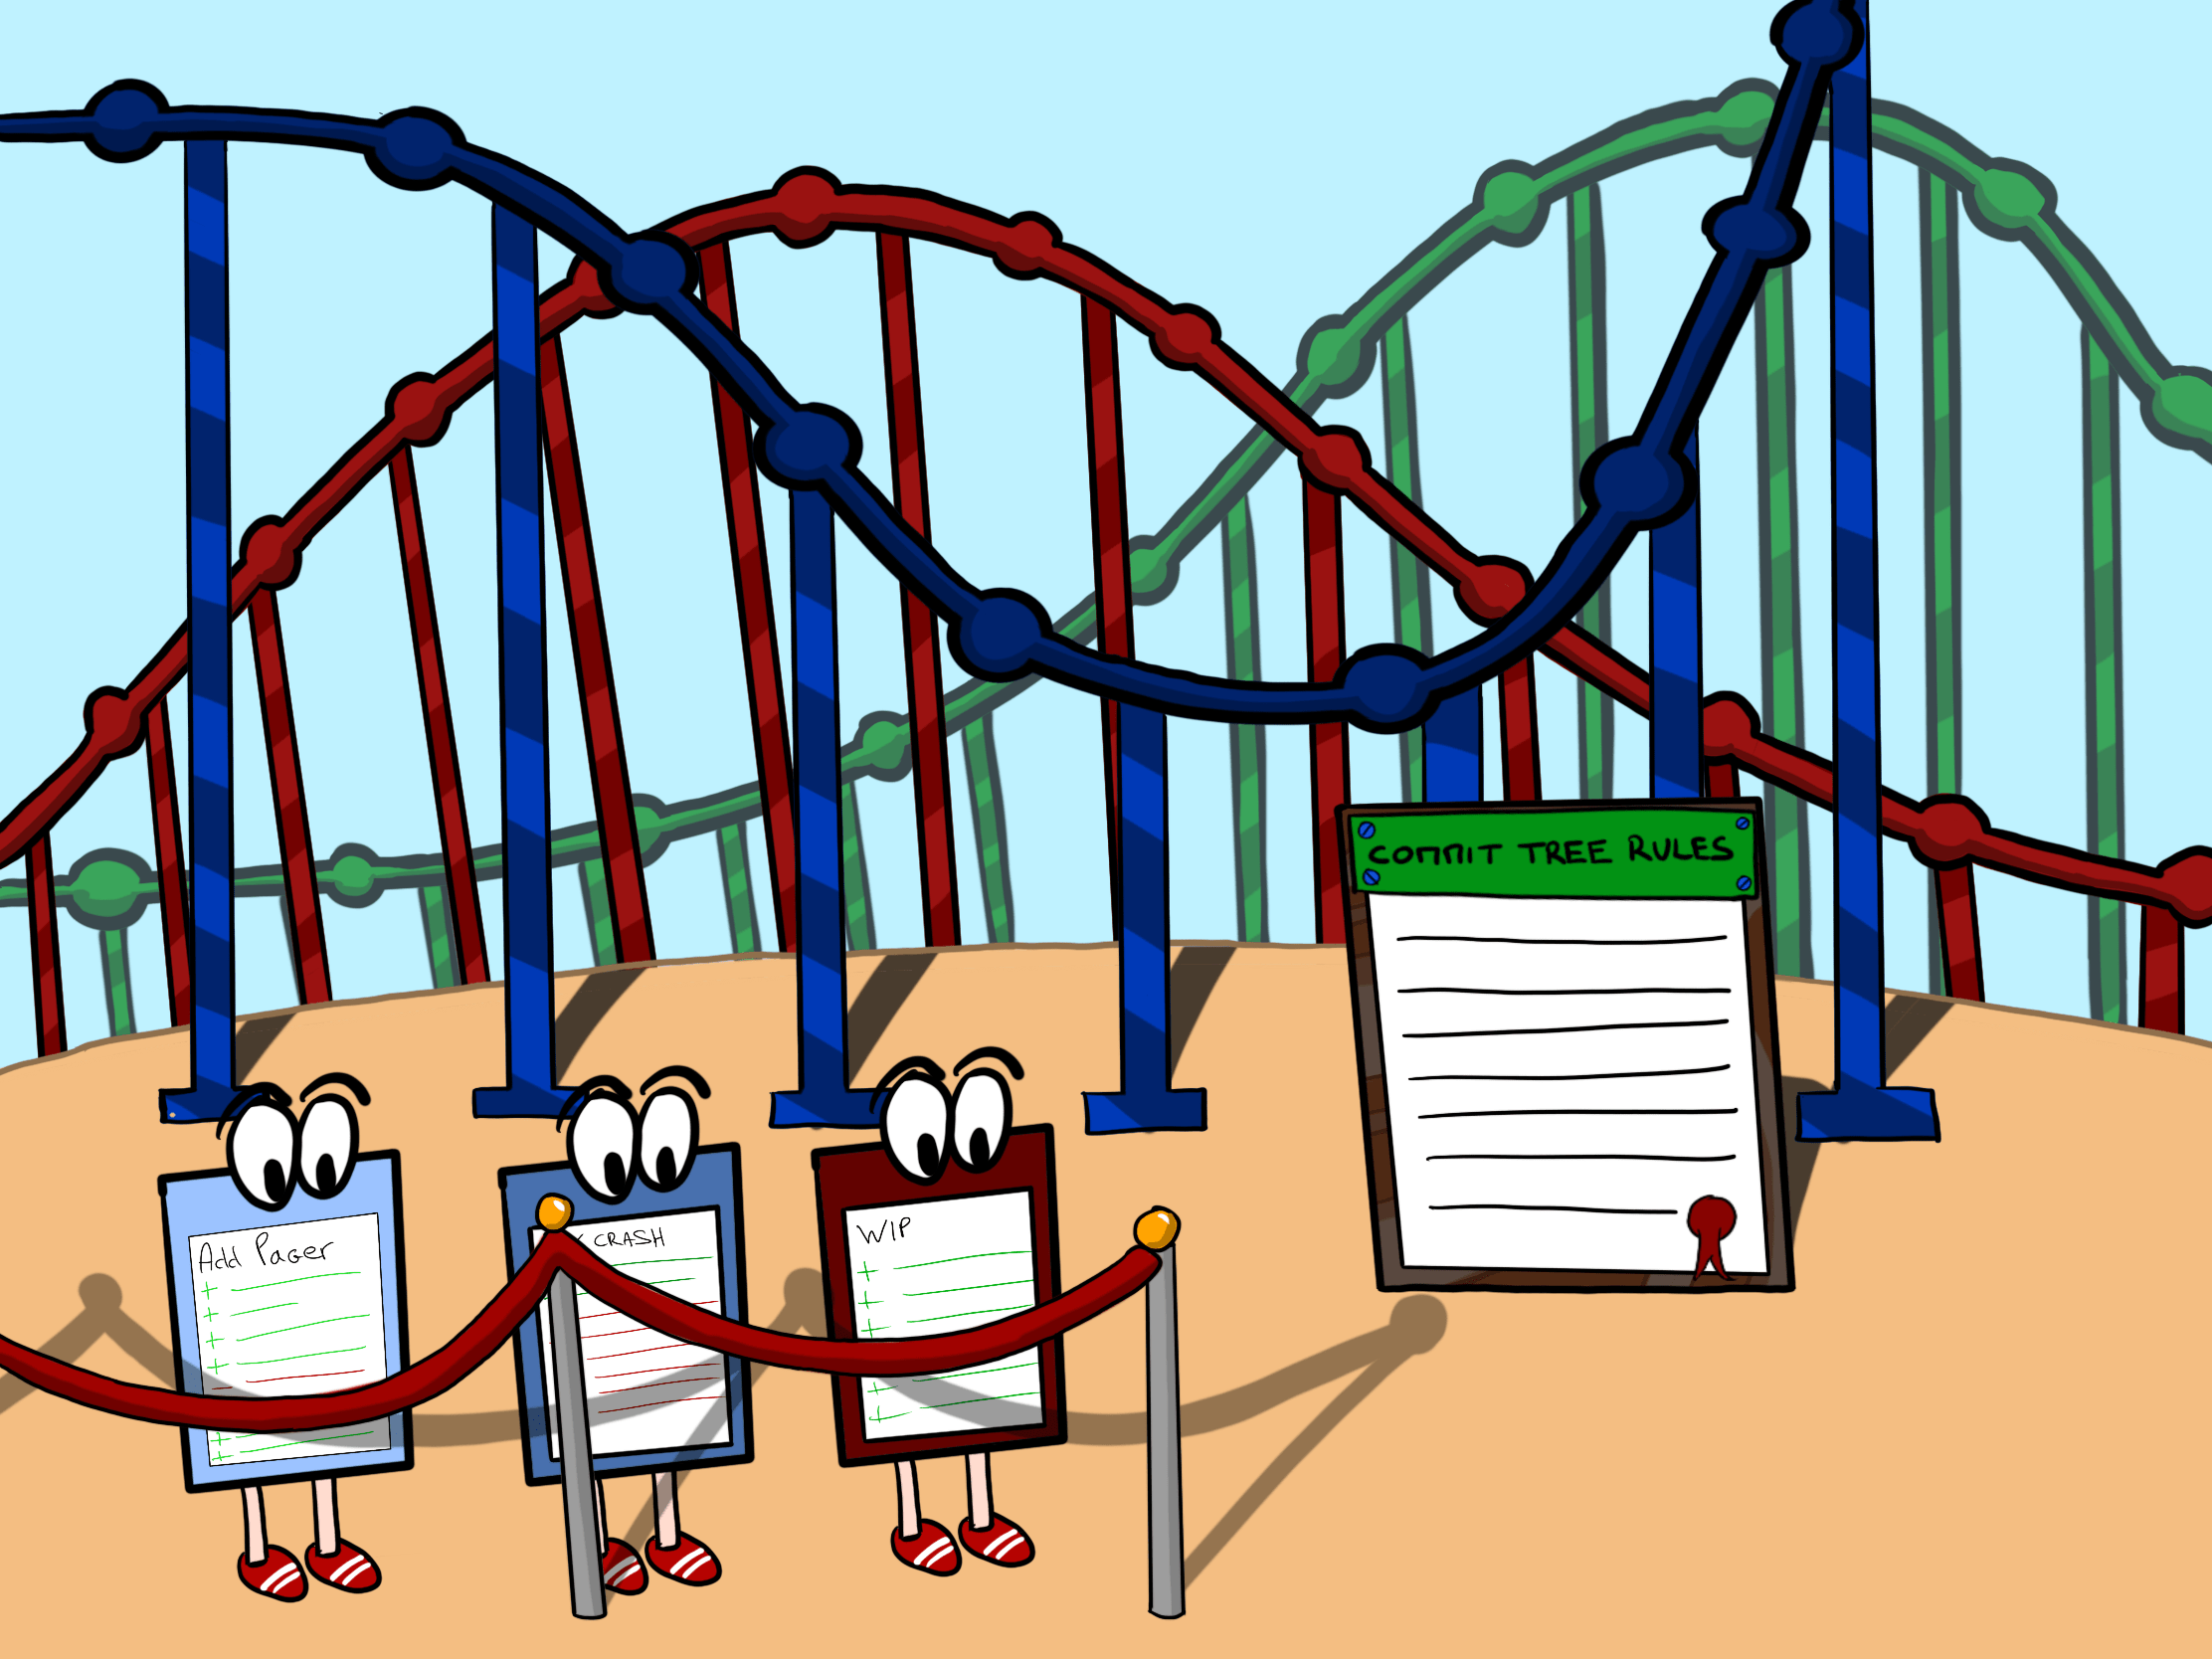 Git commits characters waiting in line to ride a roller coaster